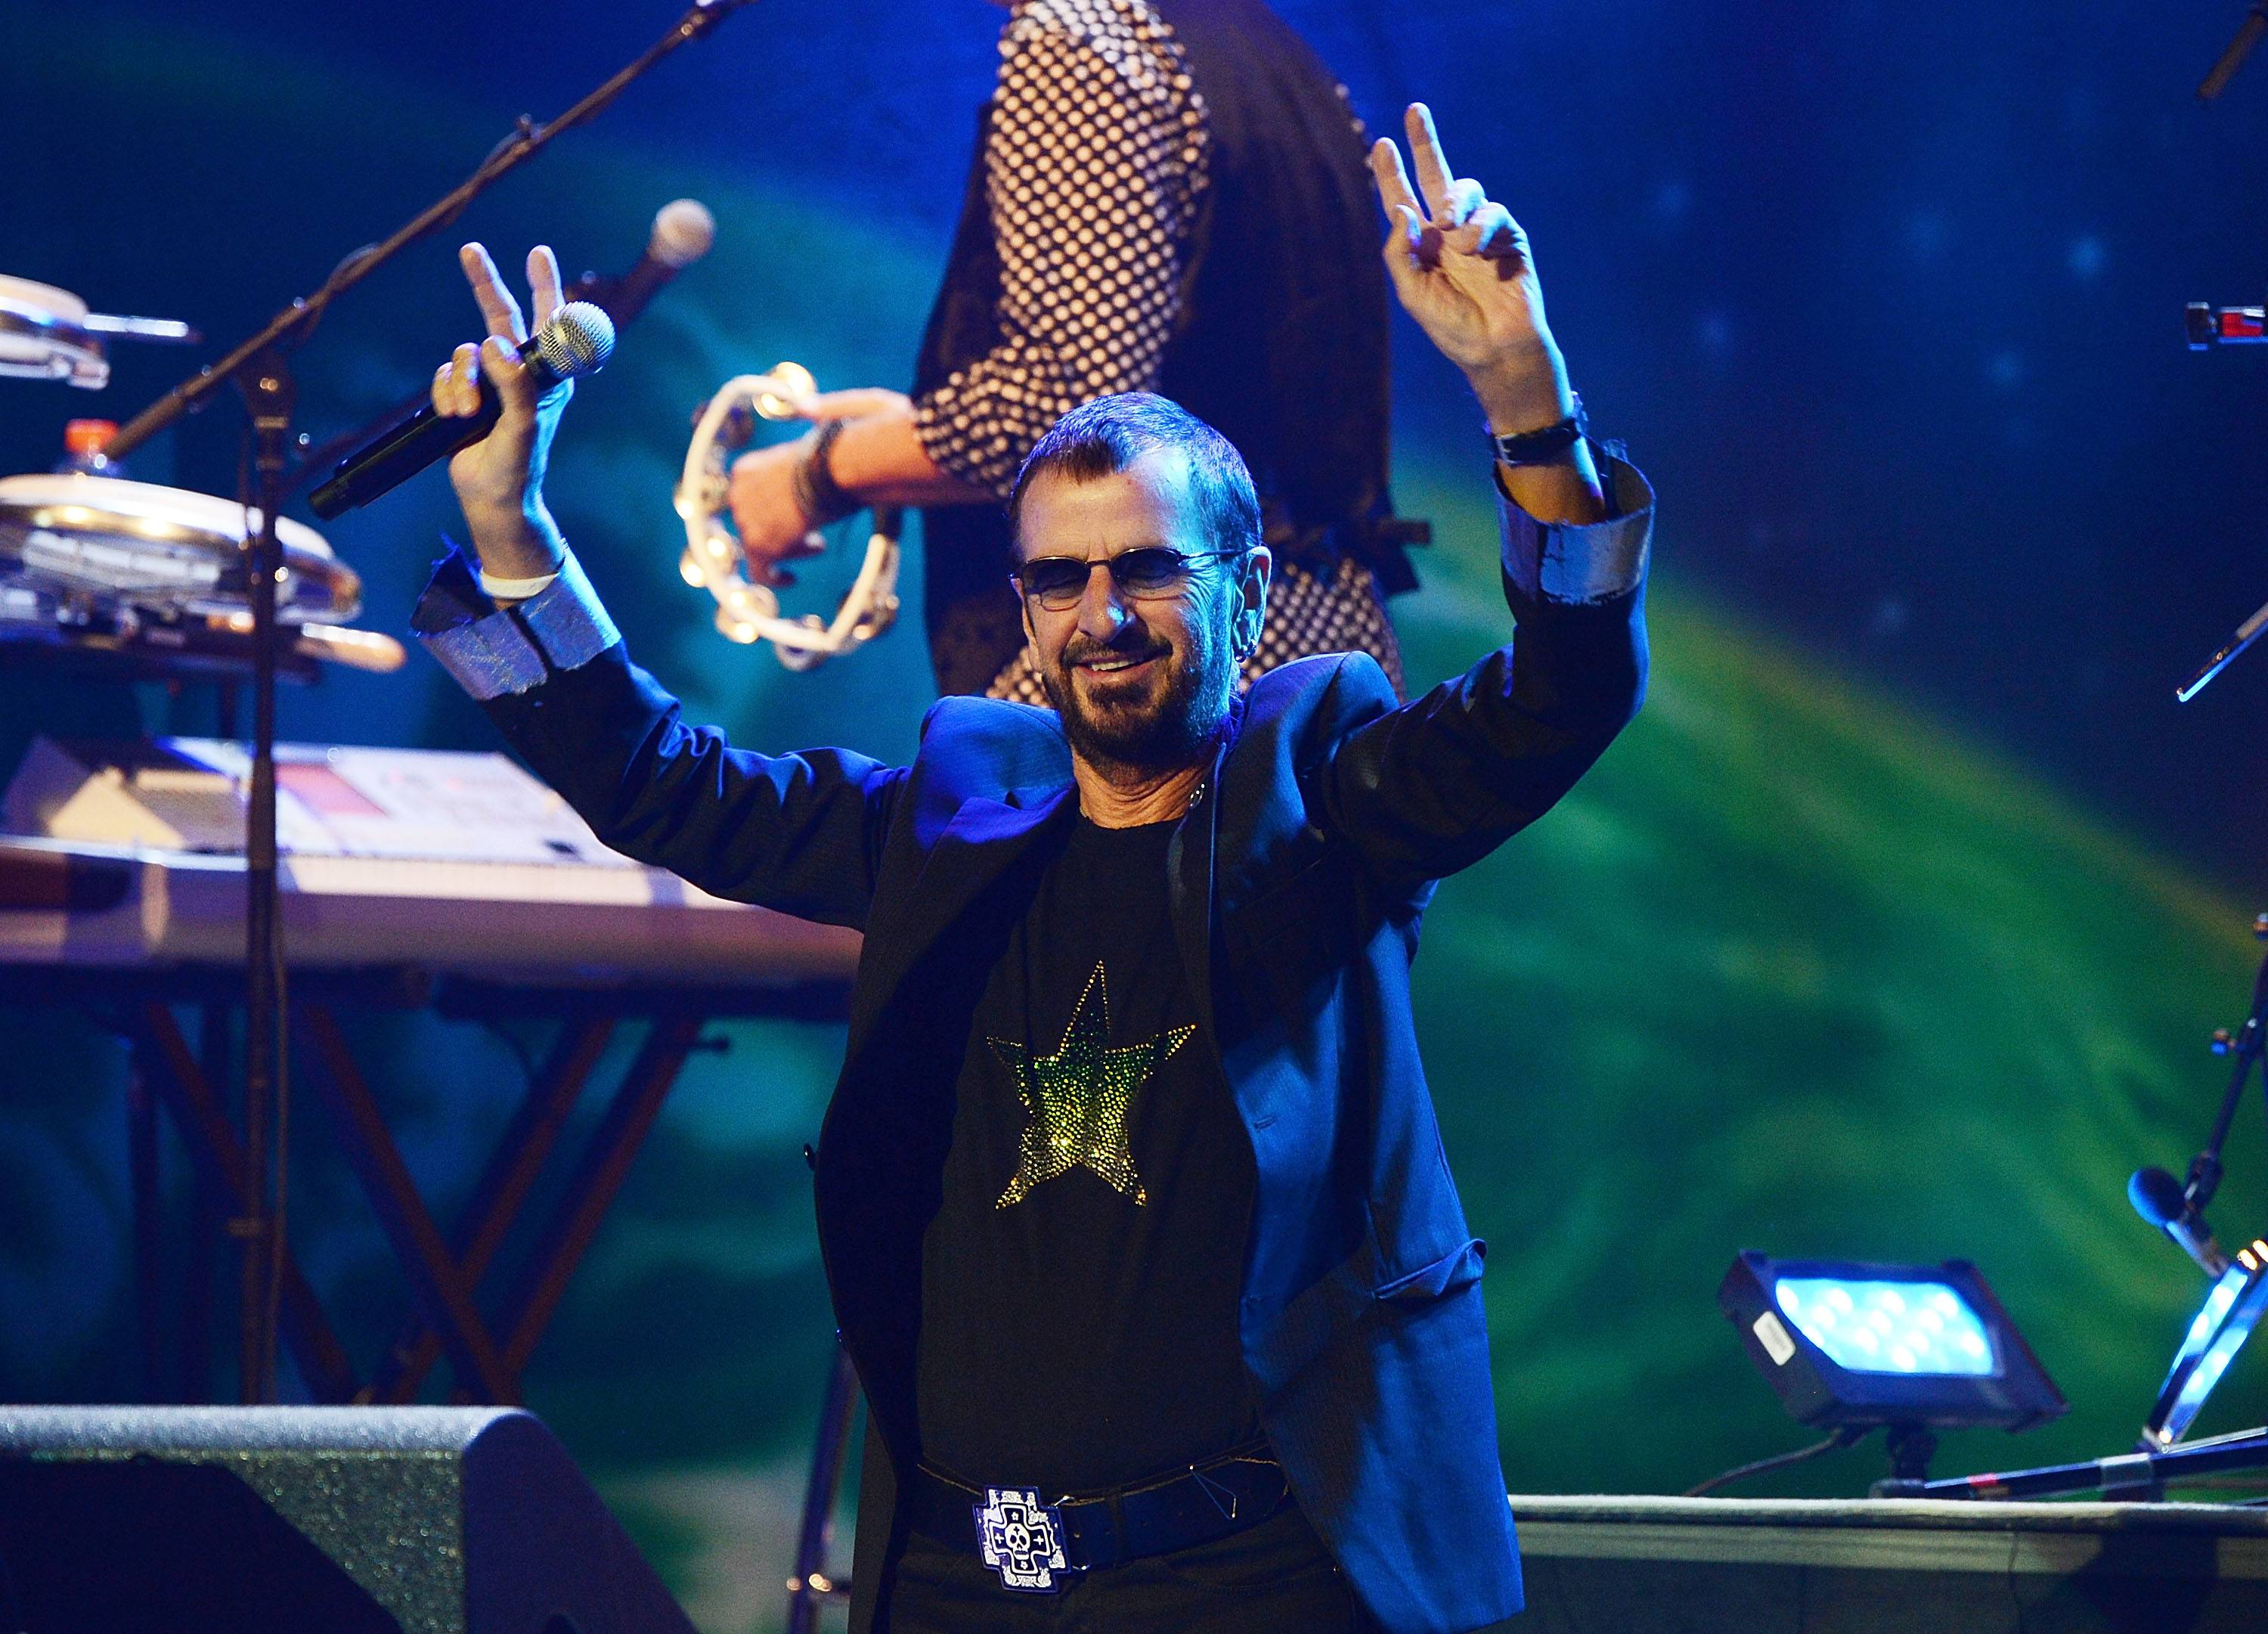 Ringo Starr & His All-Starr Band Performs At The Pearl In The Palms Casino Resort